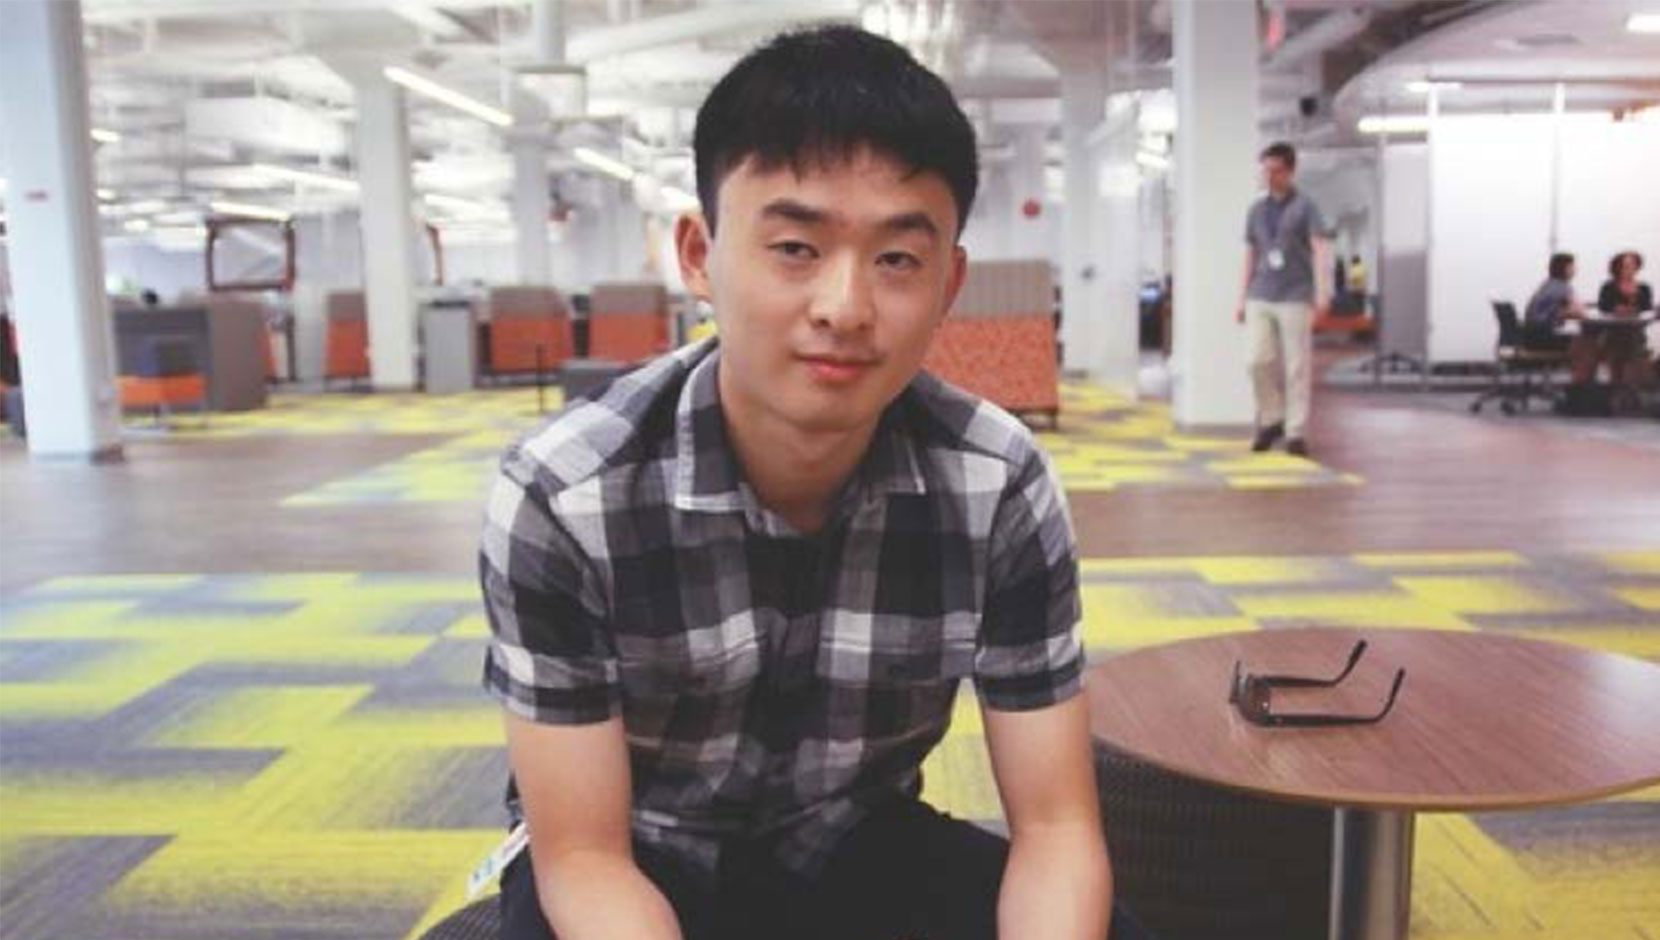 Matthew Huang of SAP. He is seated on a round chair at SAP's Vancouver office, with colourful patterned floor all around. He is an Asian man with short dark hair, and a short sleeve top.